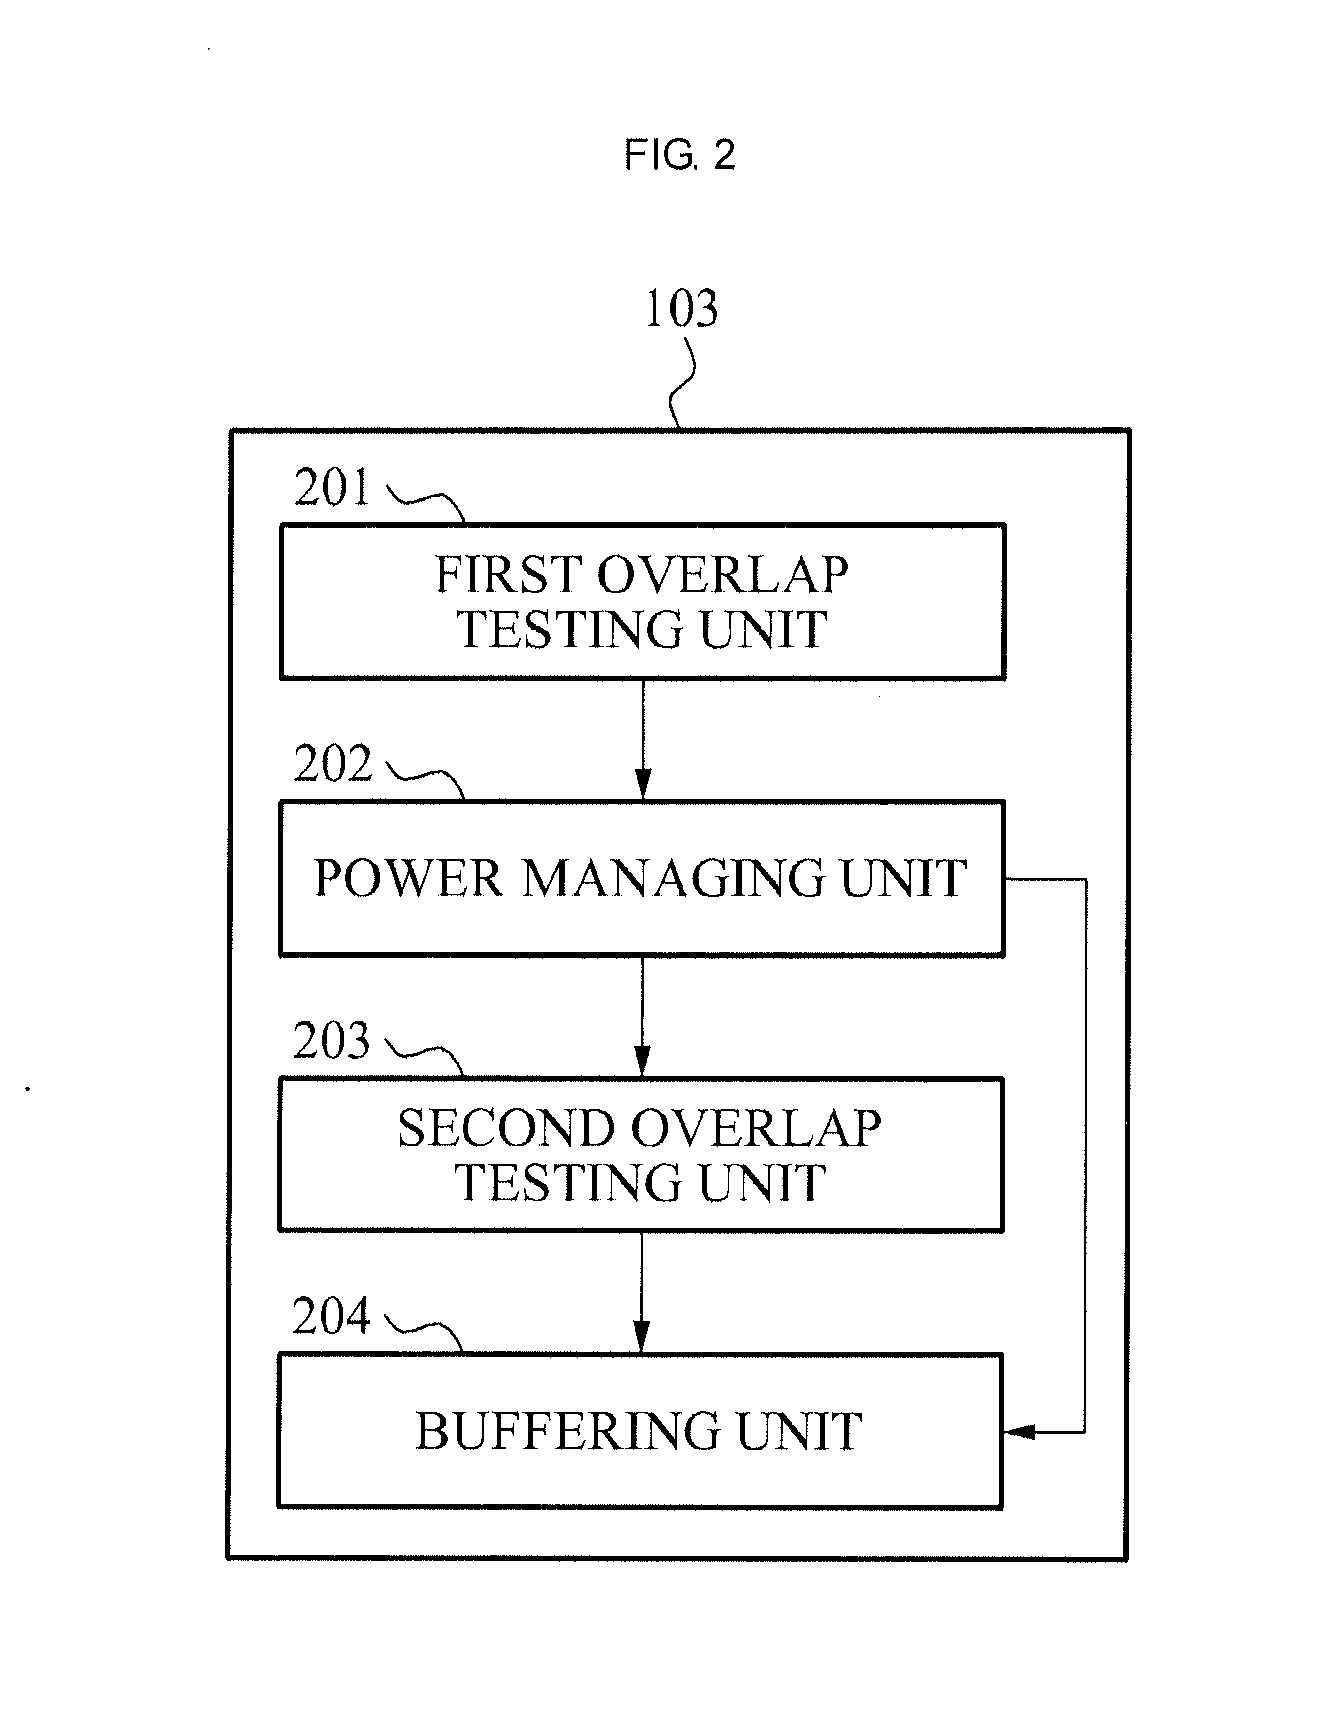 Apparatus and method for tile binning to reduce power consumption